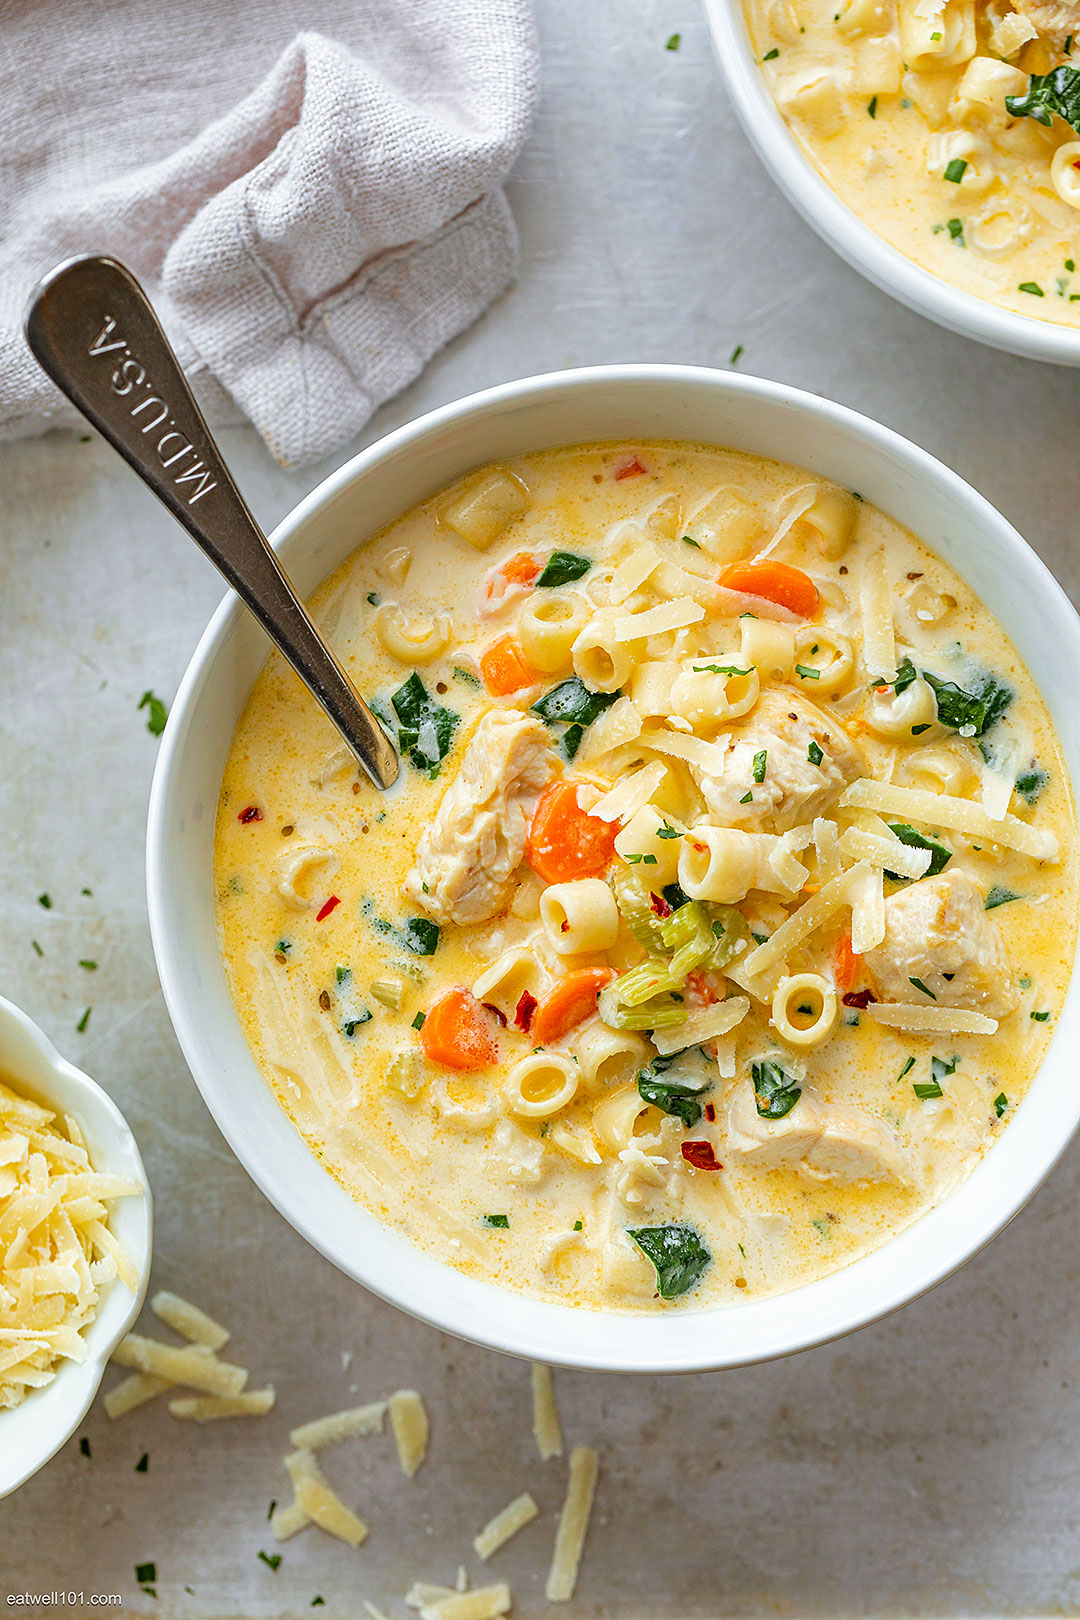 https://www.eatwell101.com/wp-content/uploads/2020/02/Creamy-Chicken-Soup-with-Pasta-and-Spinach-2.jpg